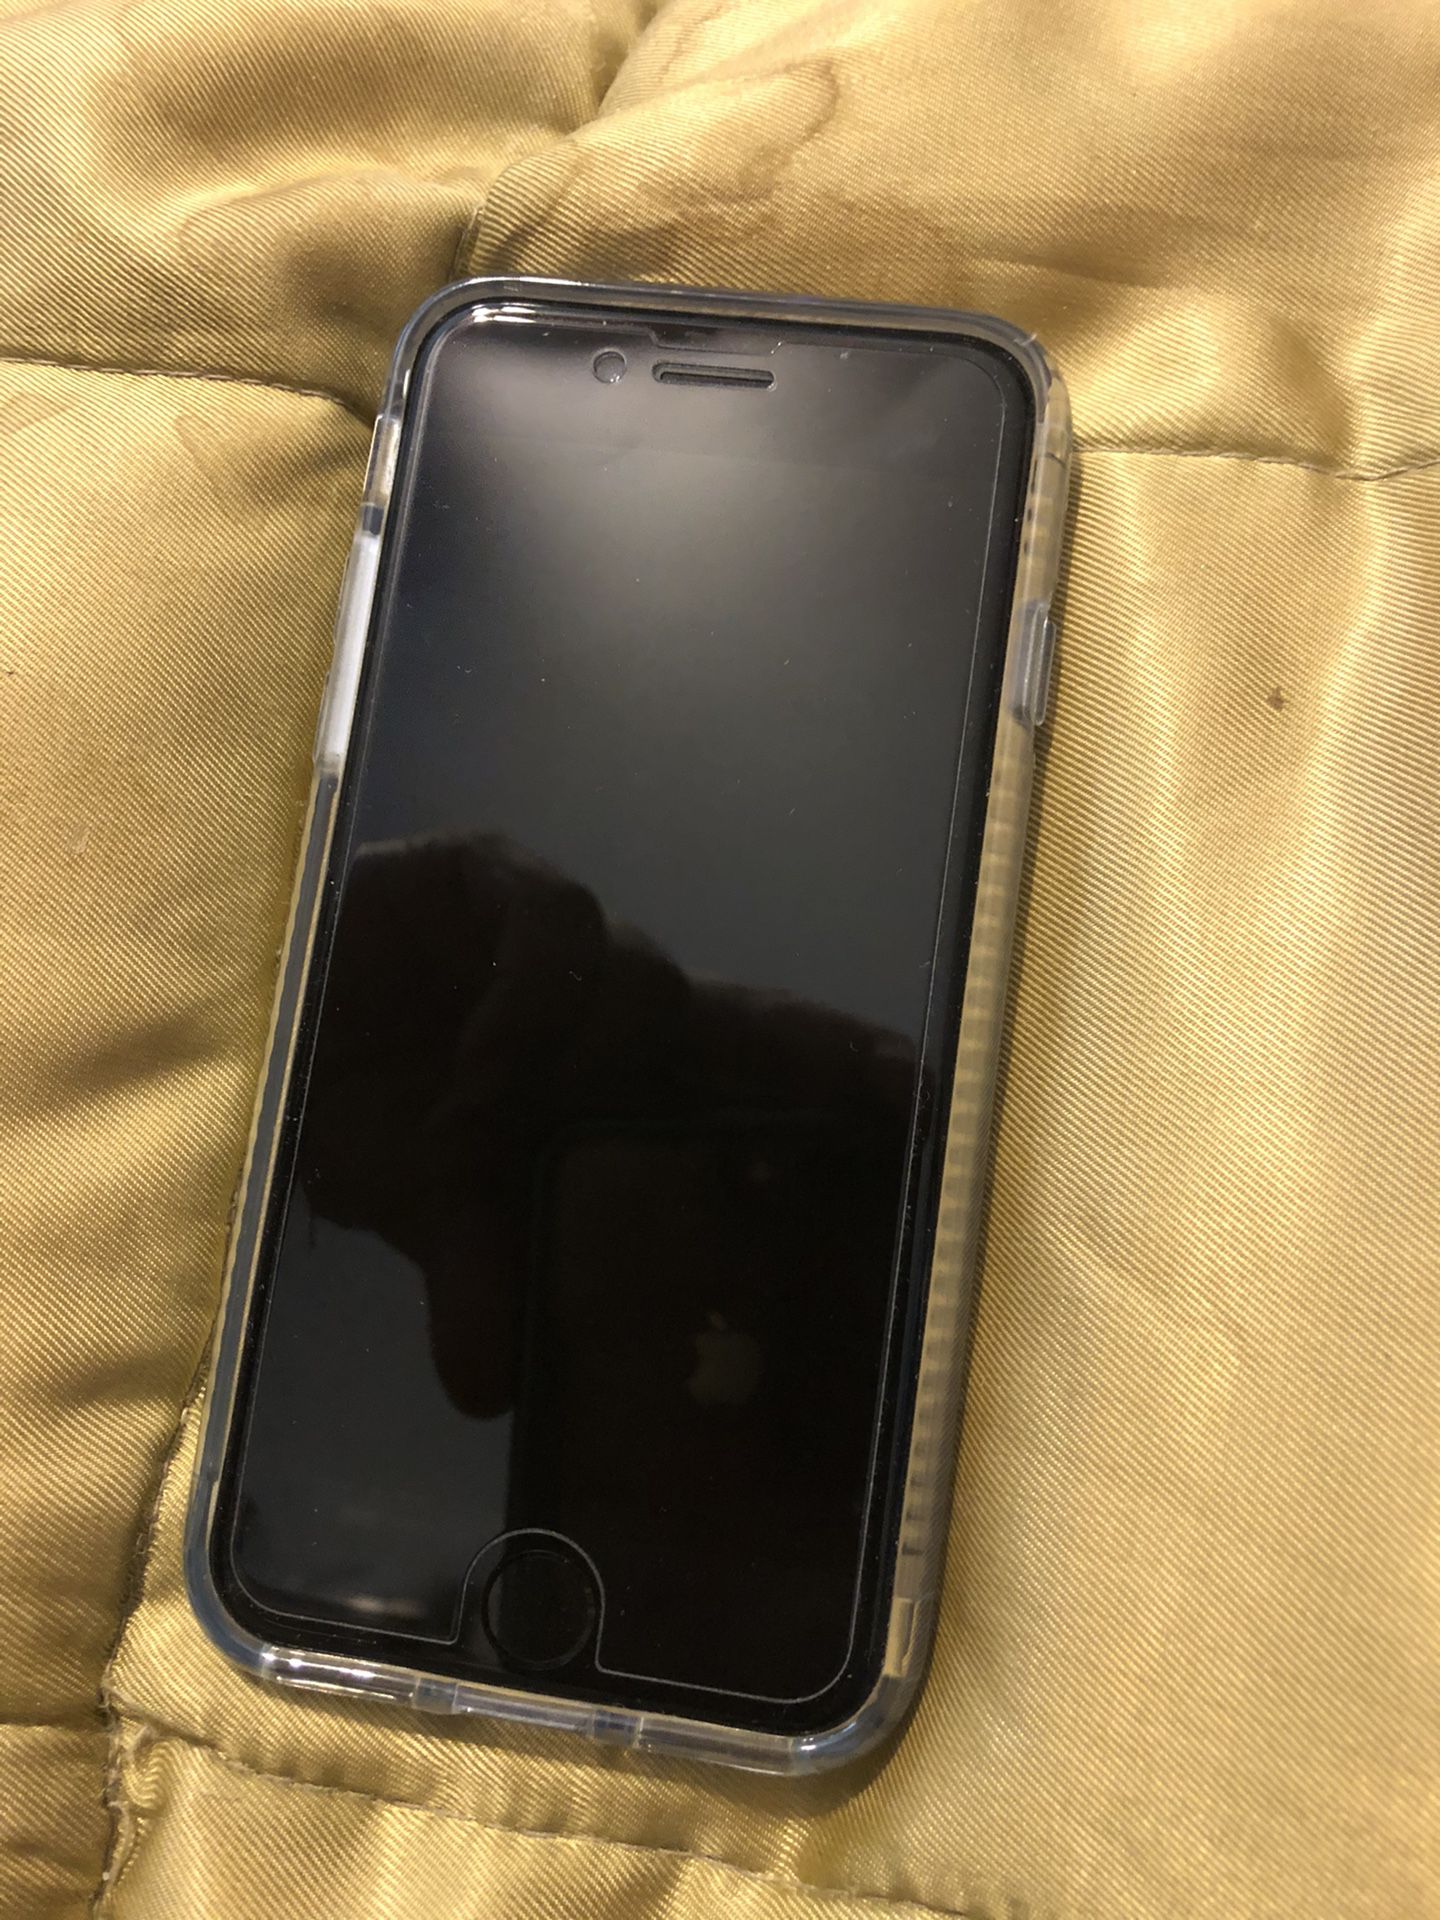 iPhone 8 locked found unclaimed